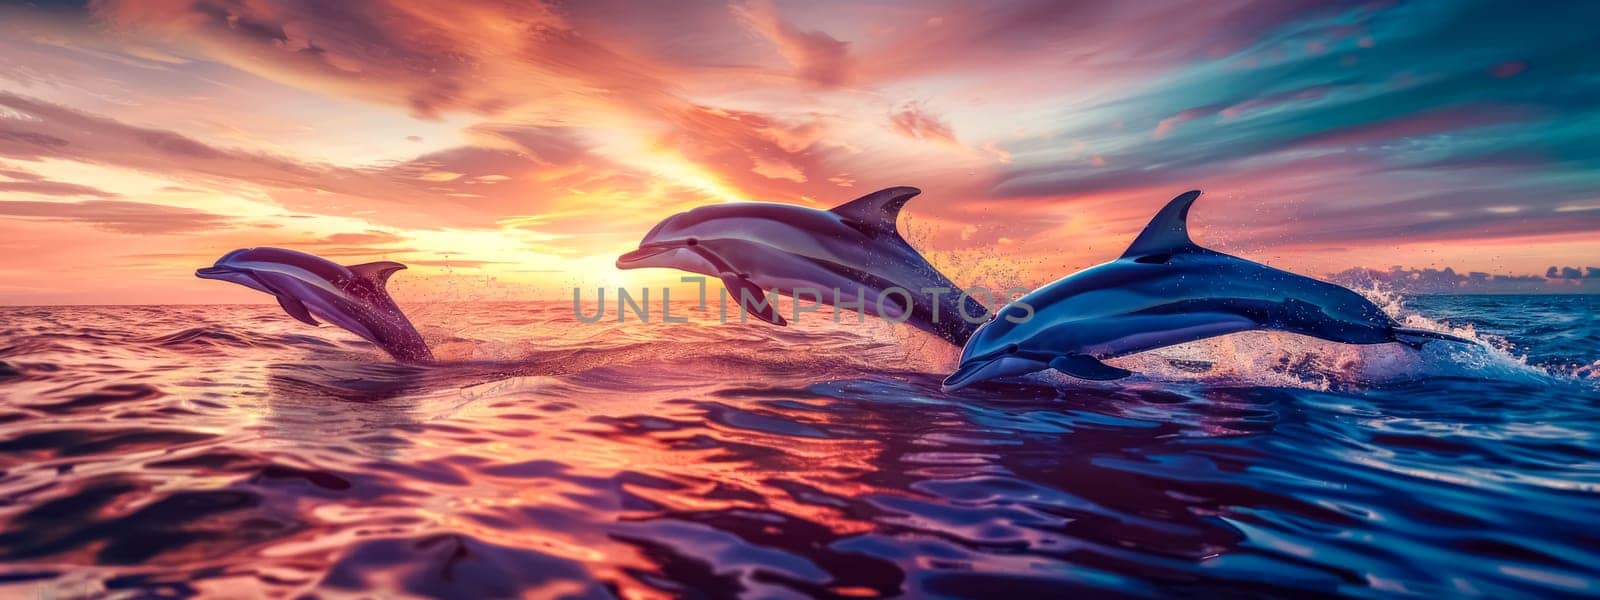 Majestic dolphins leaping at sunset by Edophoto